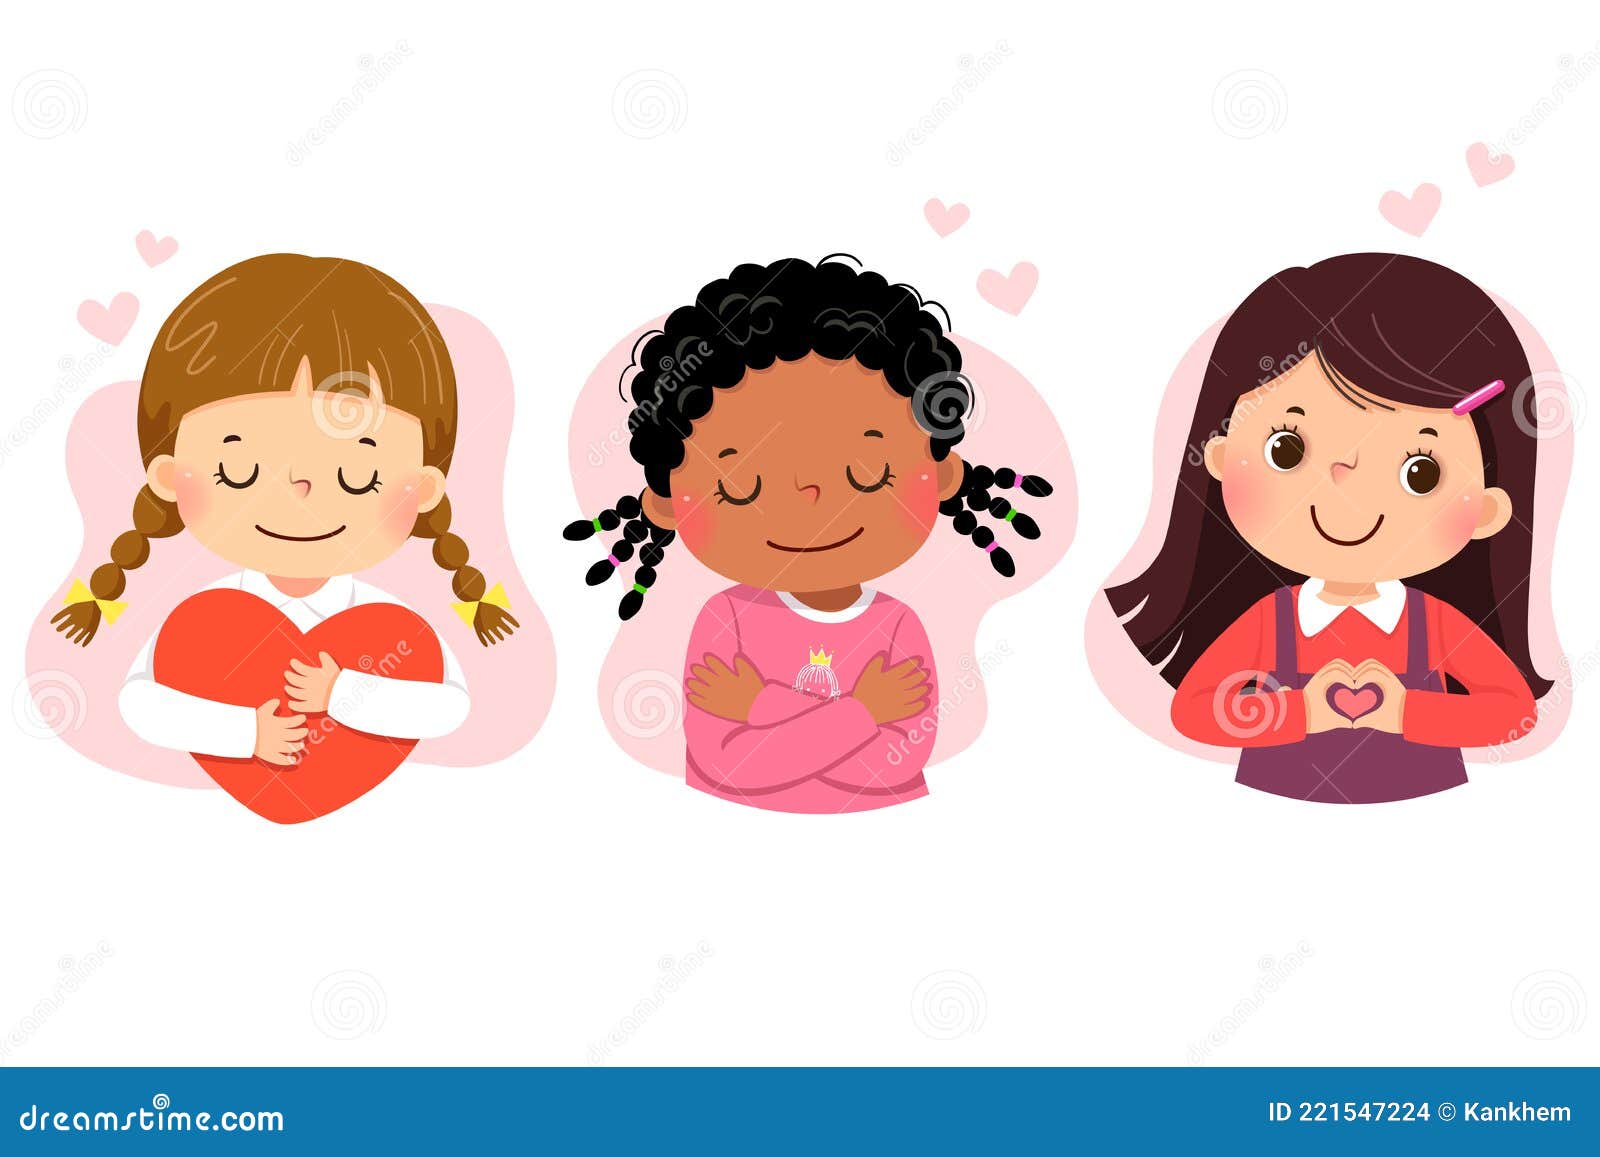 set of cartoon of little girls hugging themself. self love, self care, positive, happiness concept